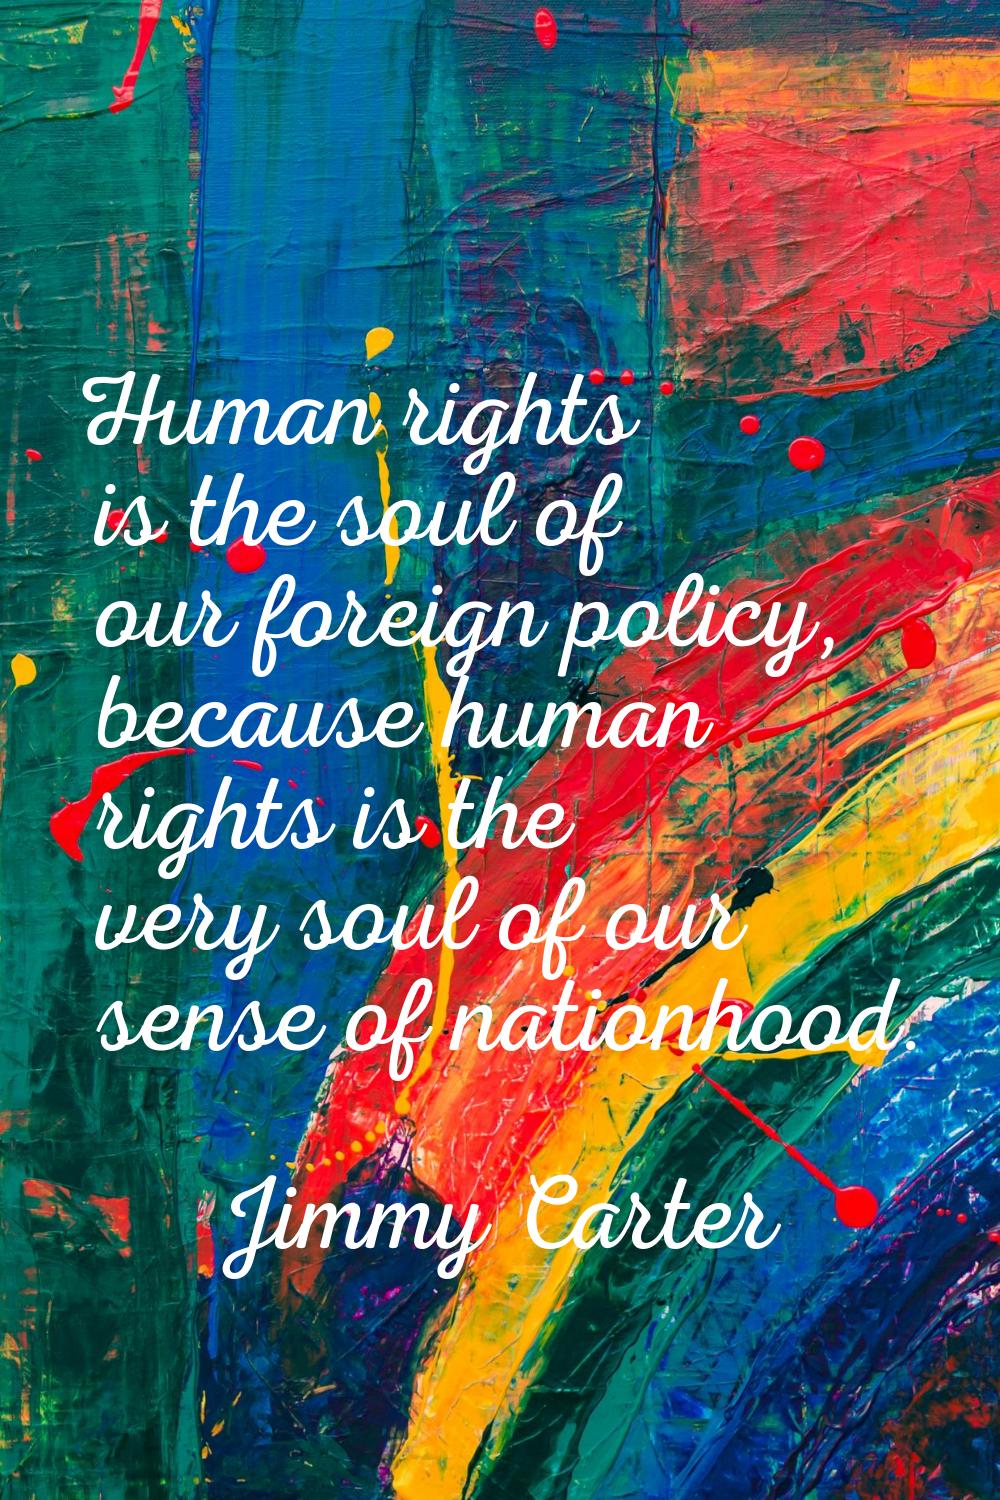 Human rights is the soul of our foreign policy, because human rights is the very soul of our sense 